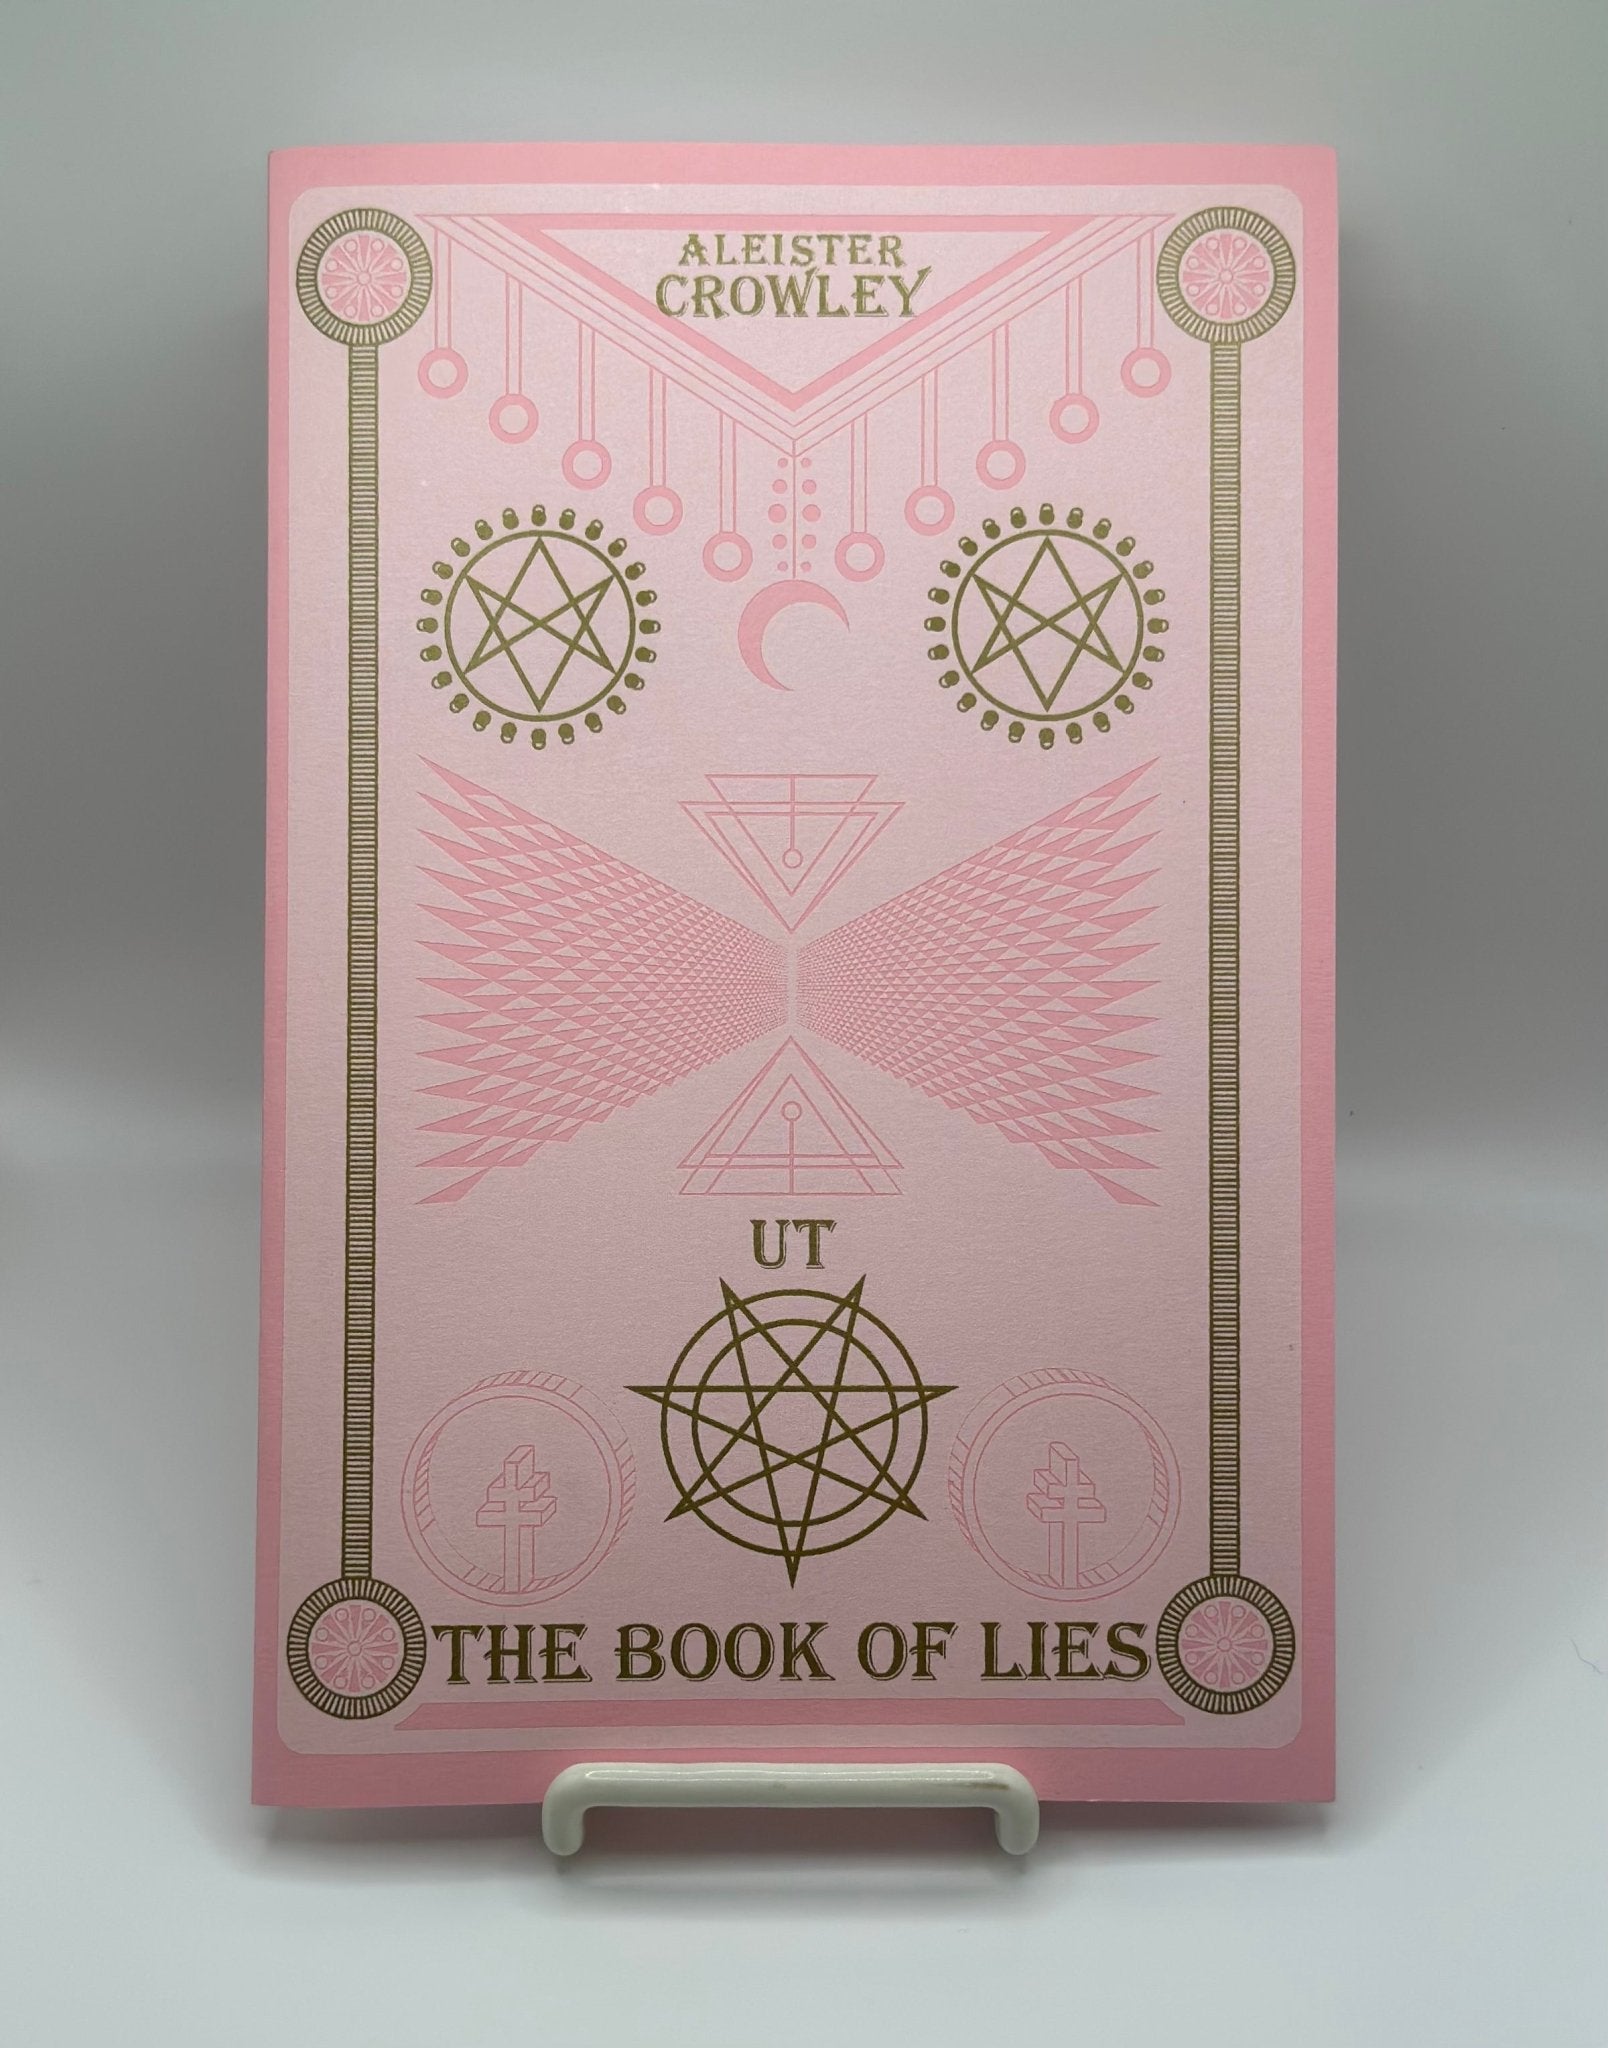 Book of Lies by Aleister Crowley - Exalted Funeral